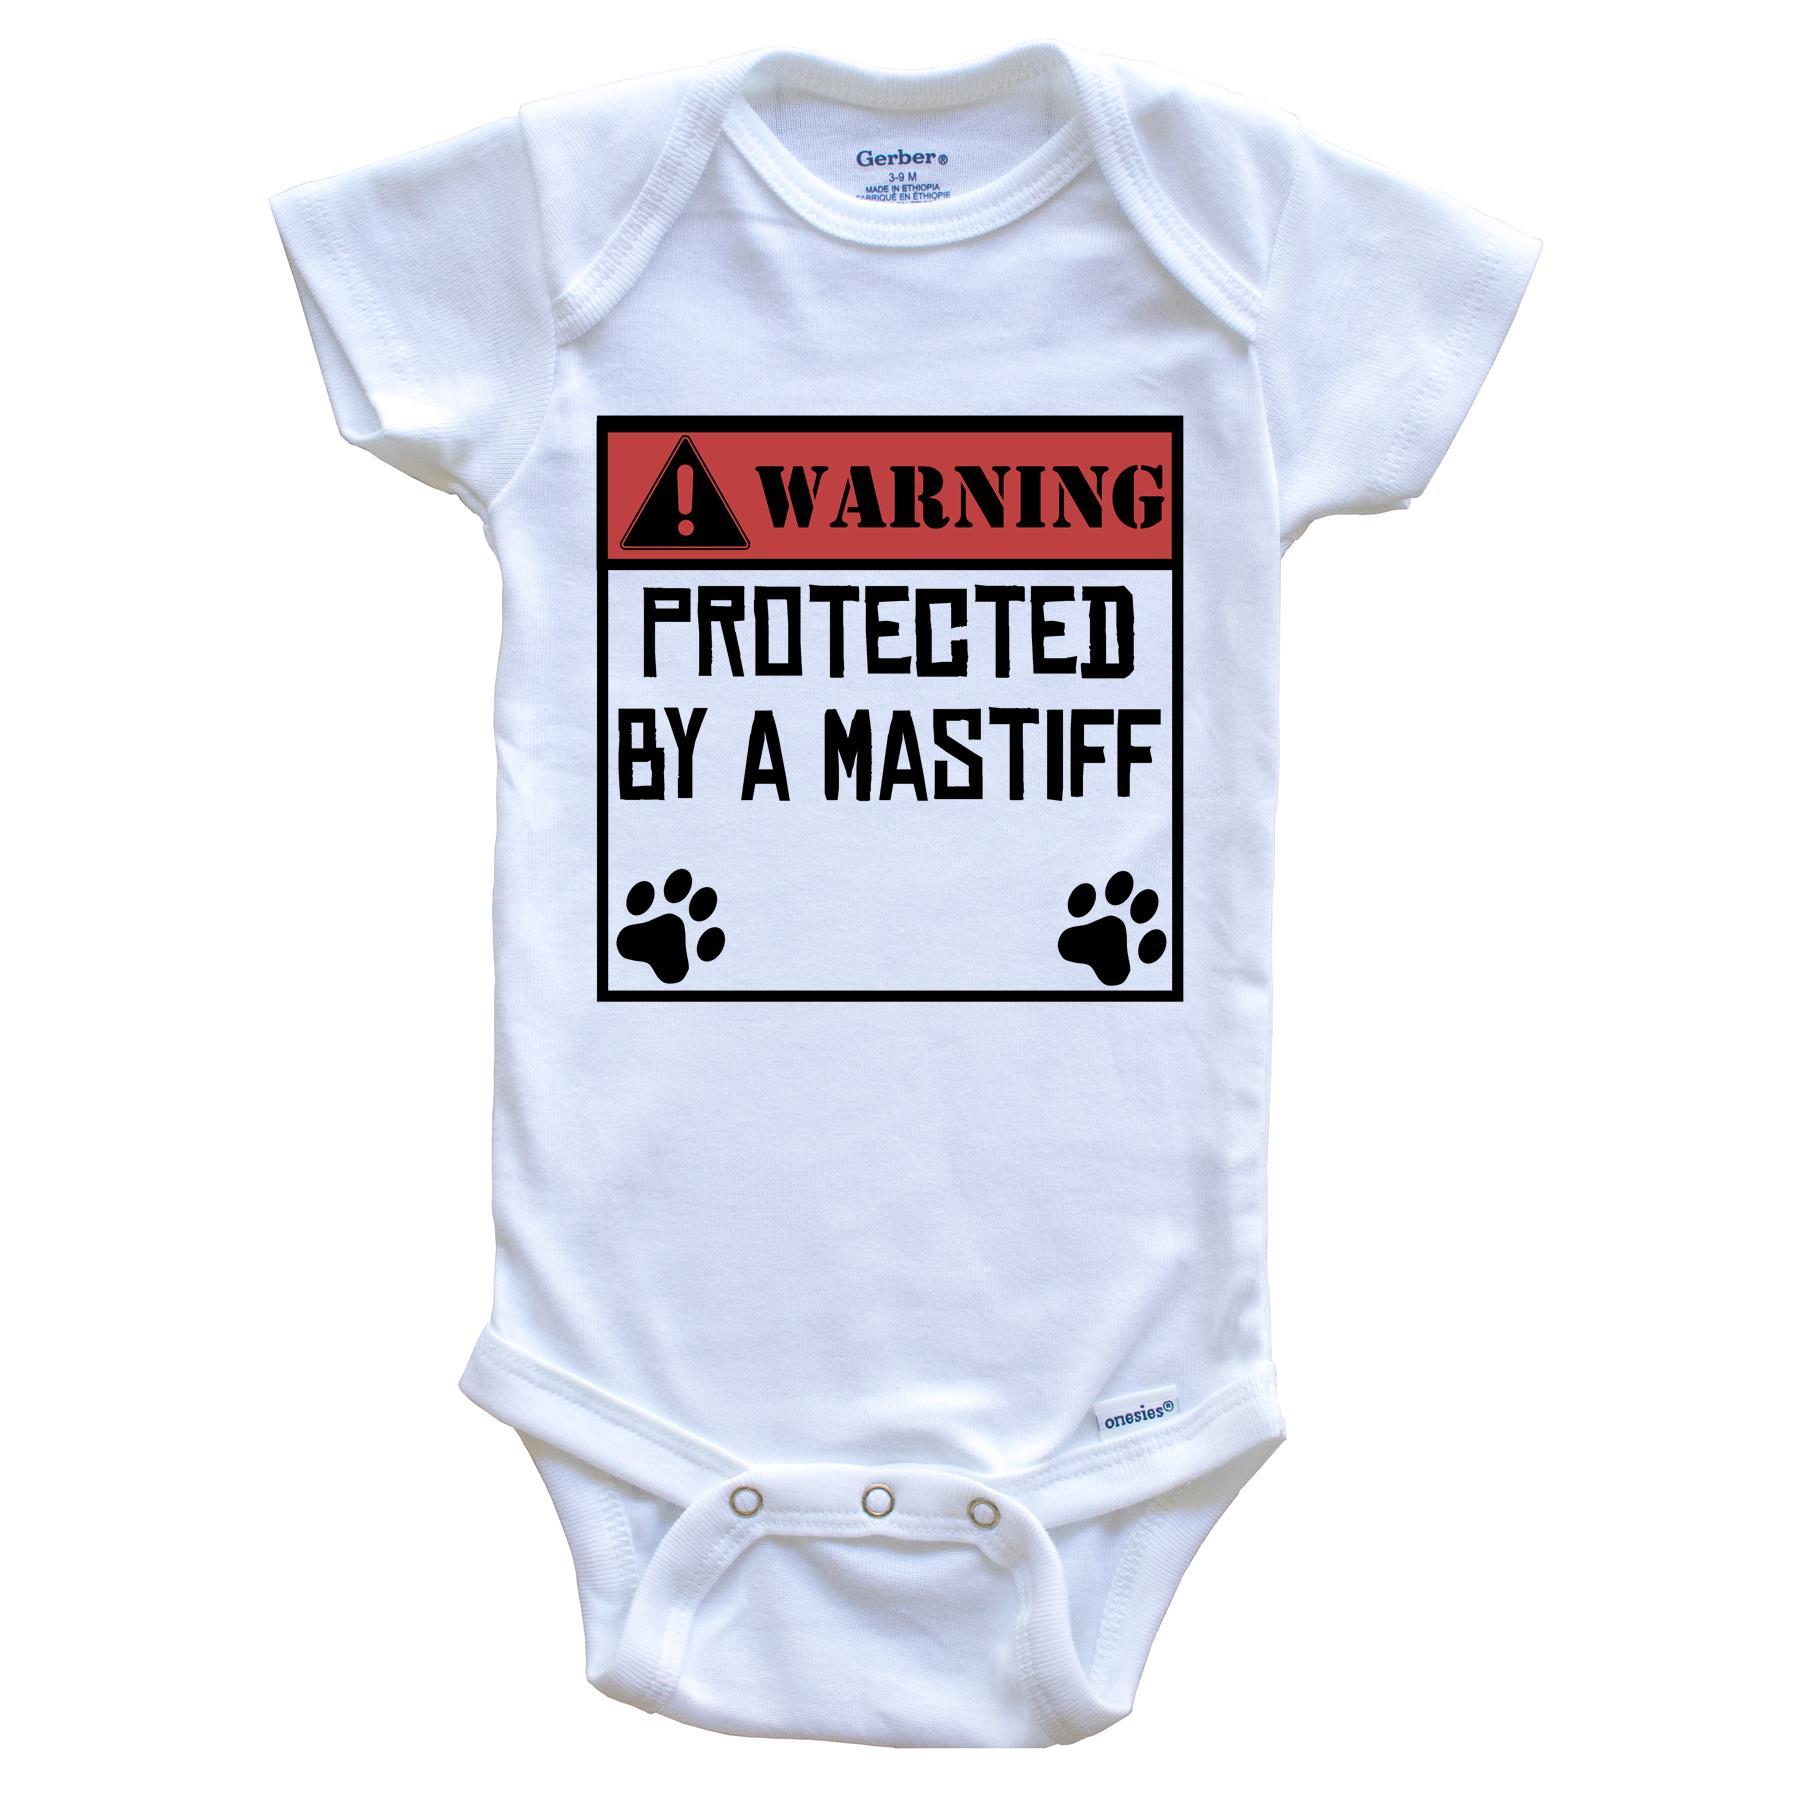 Warning Protected By A Mastiff Funny Baby Onesie